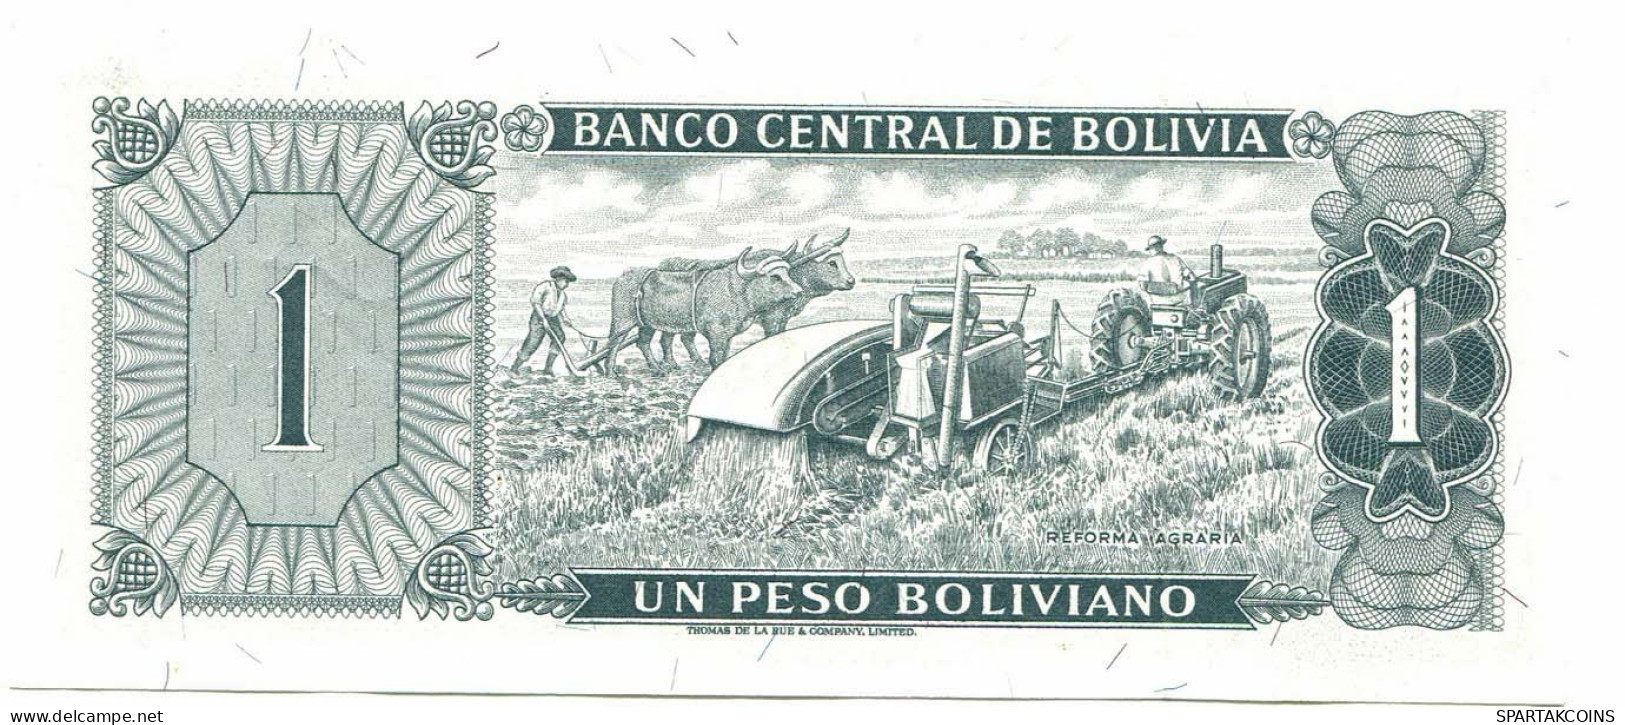 BOLIVIA 1 PESO 1962 AUNC Paper Money Banknote #P10786.4 - [11] Local Banknote Issues